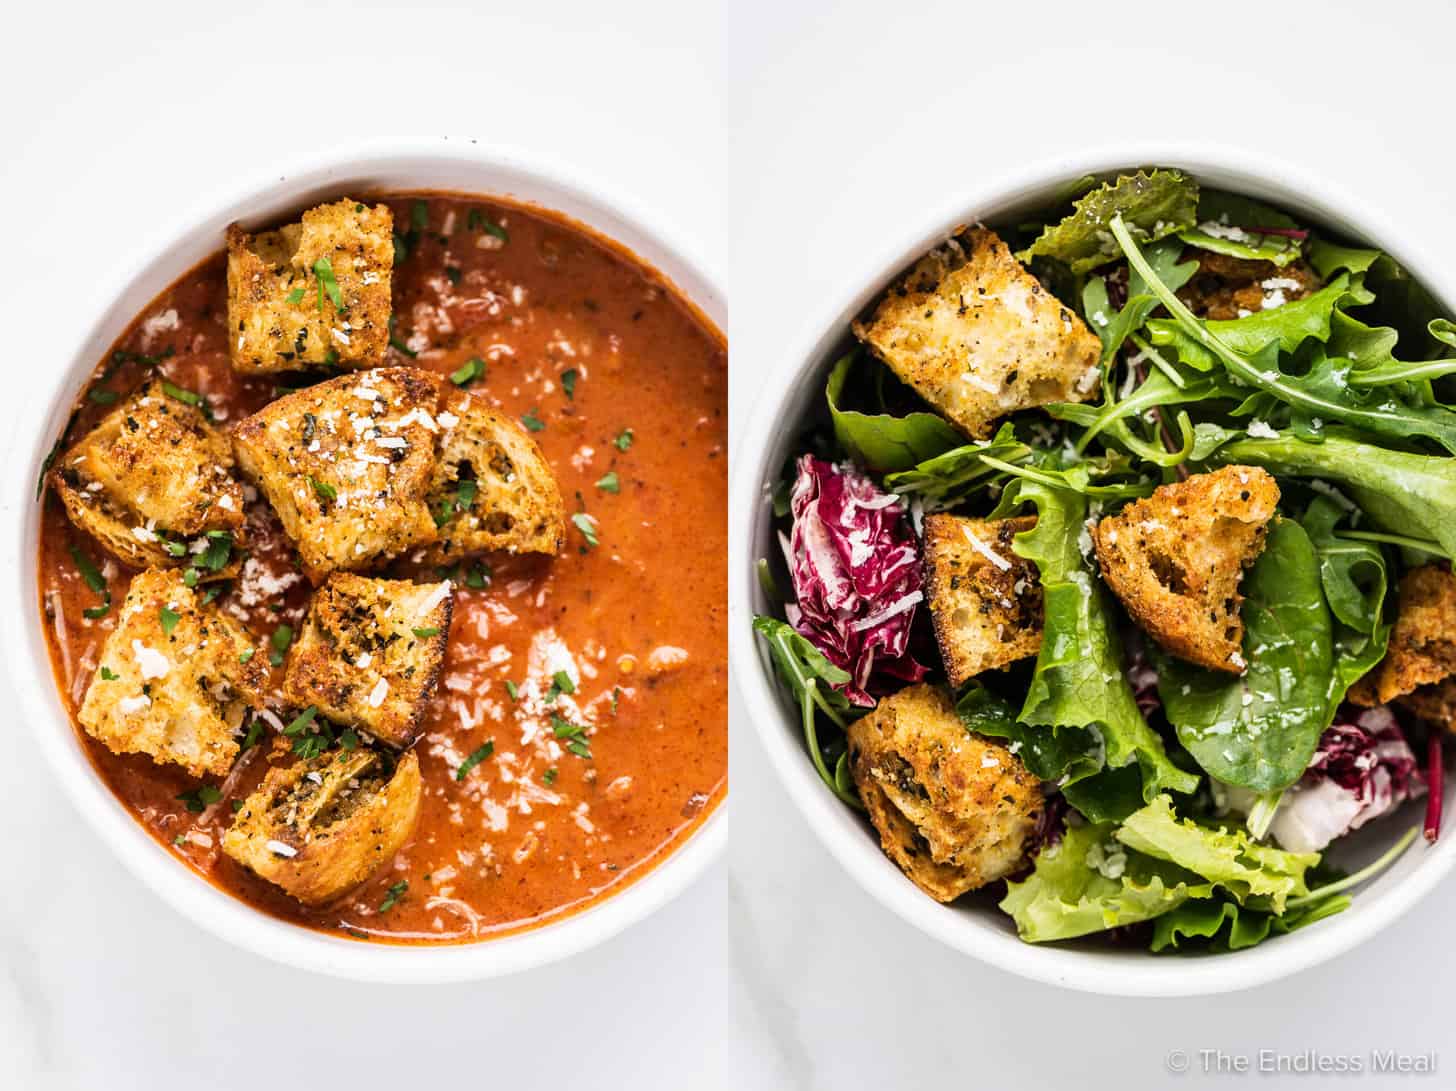 2 pictures showing parmesan croutons on a bowl of soup and in a salad